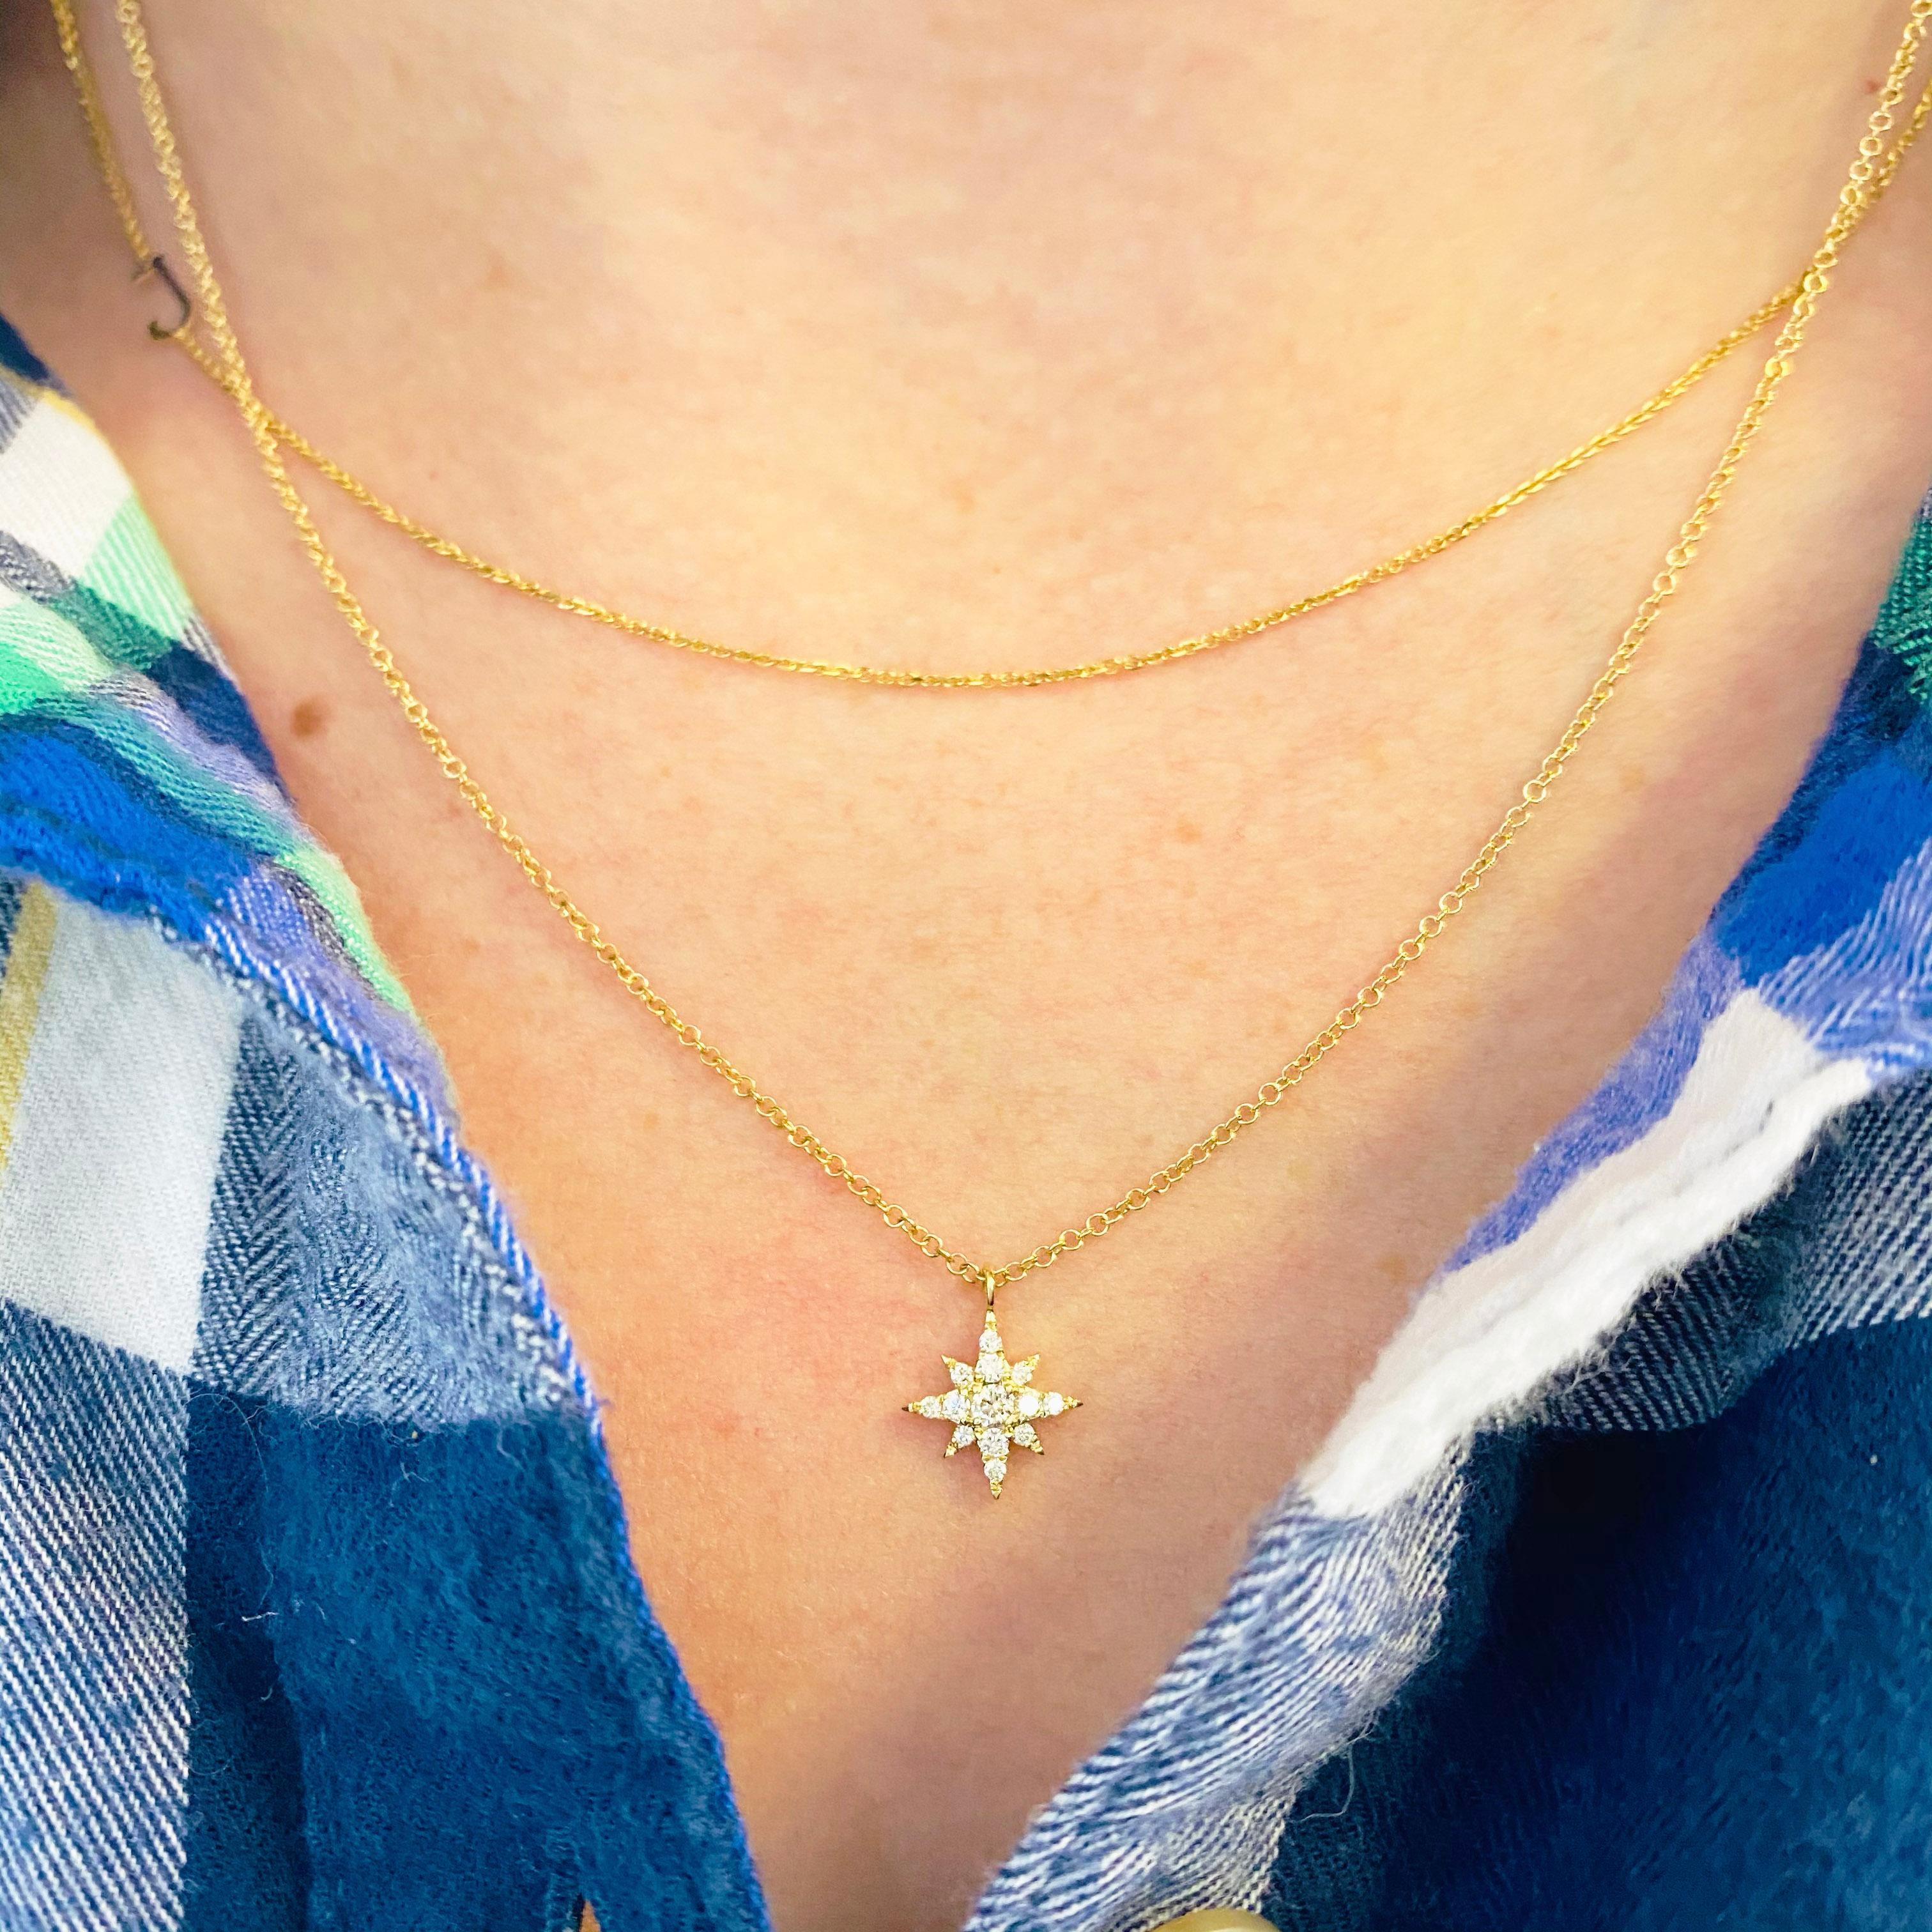 This gorgeous 14k yellow gold North Star pendant dripping with diamonds is sure to put a smile on anyone's face! This necklace looks beautiful worn by itself and also looks wonderful in a necklace stack. This necklace would make a wonderful gift for